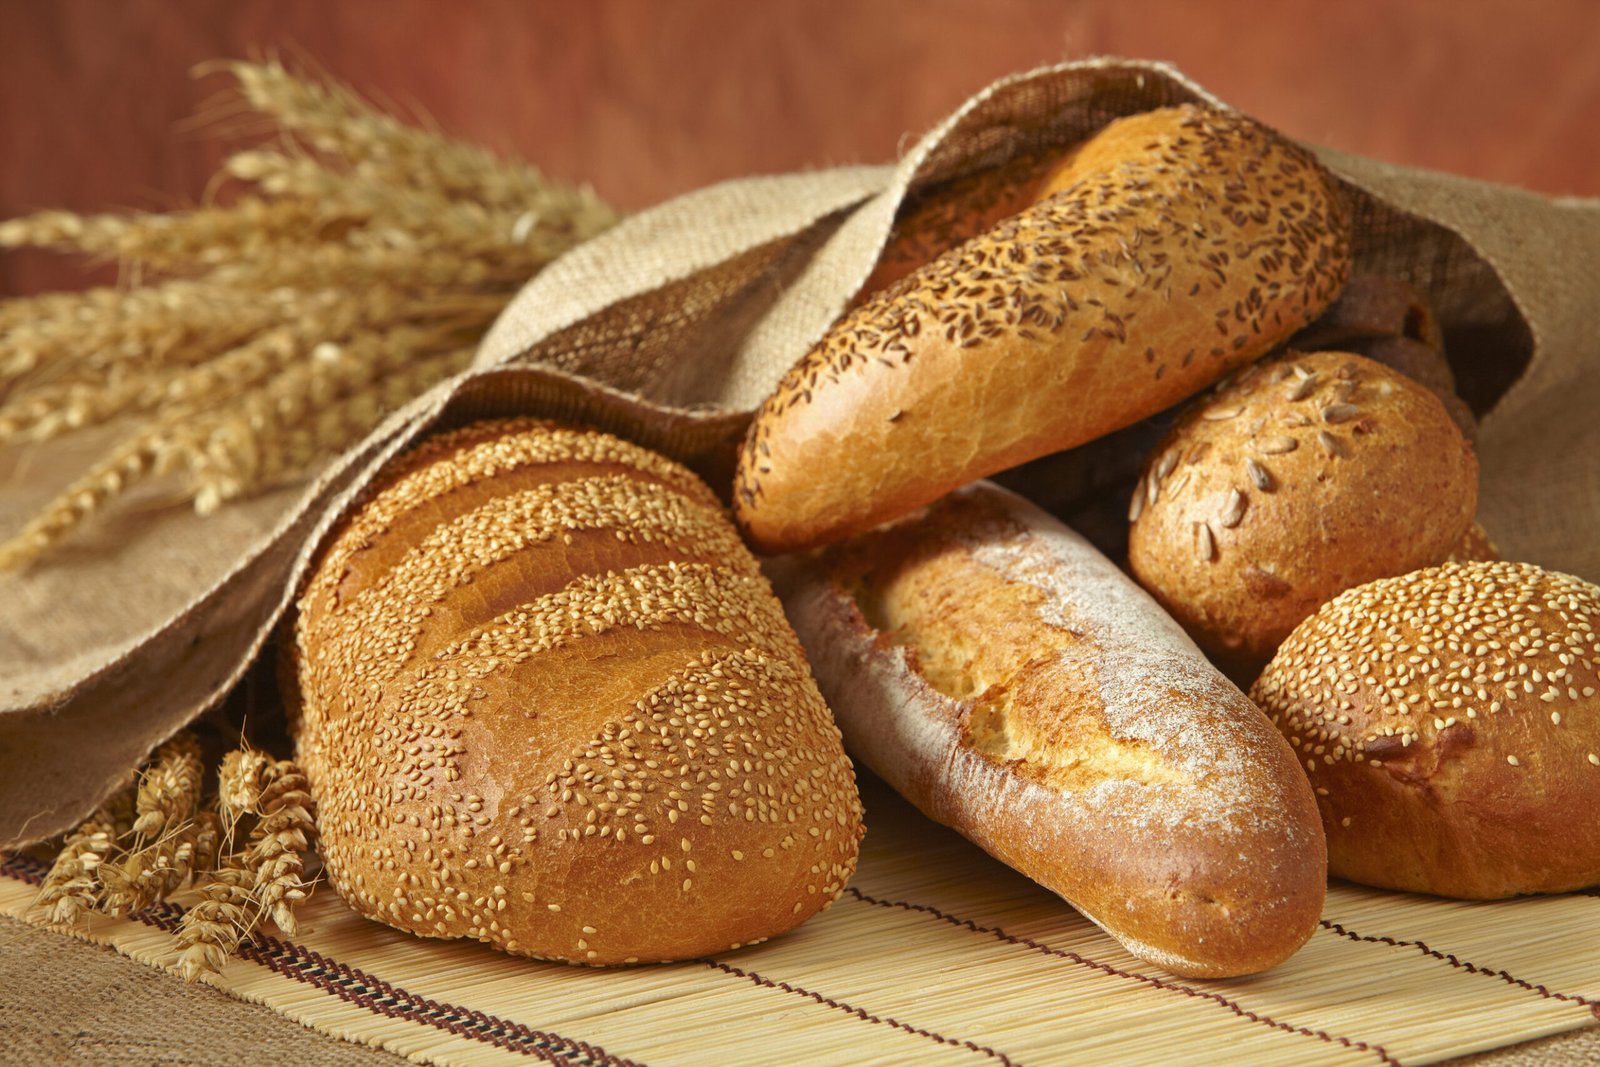 There are over 300 different kinds of bread found in Germany.